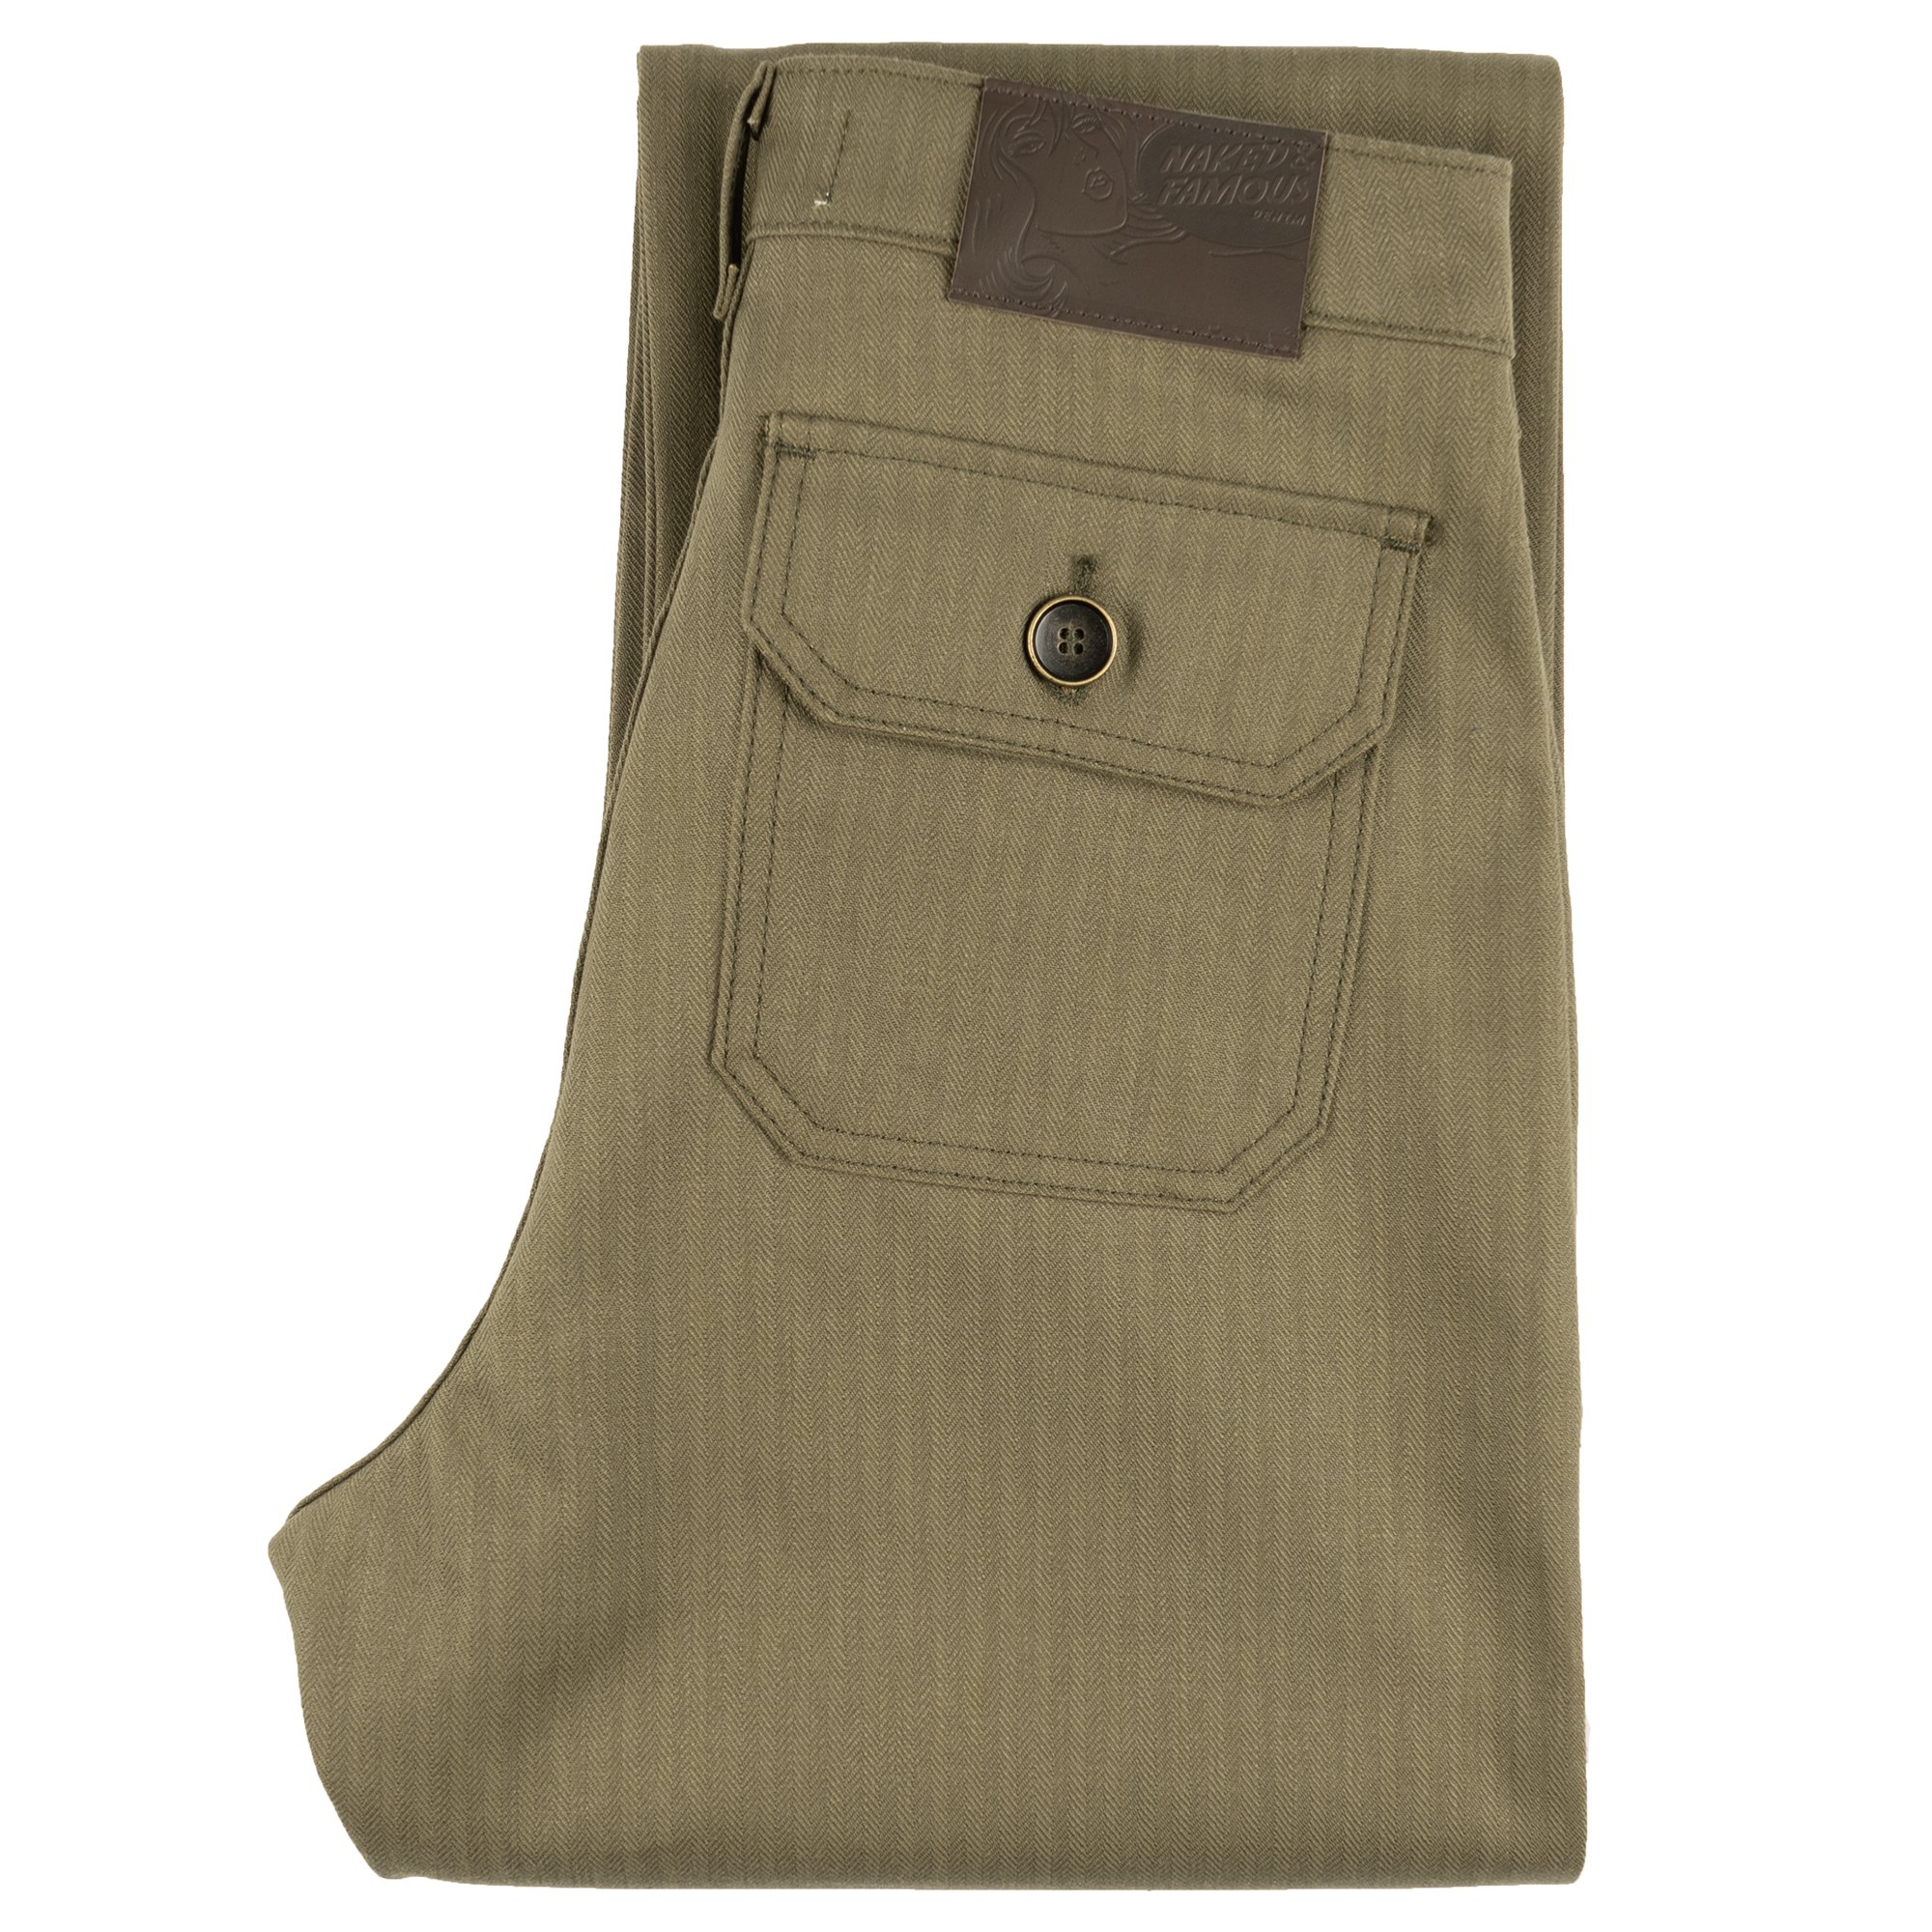  Women’s - Classic Fatigue - Army HBT - Olive Drab 